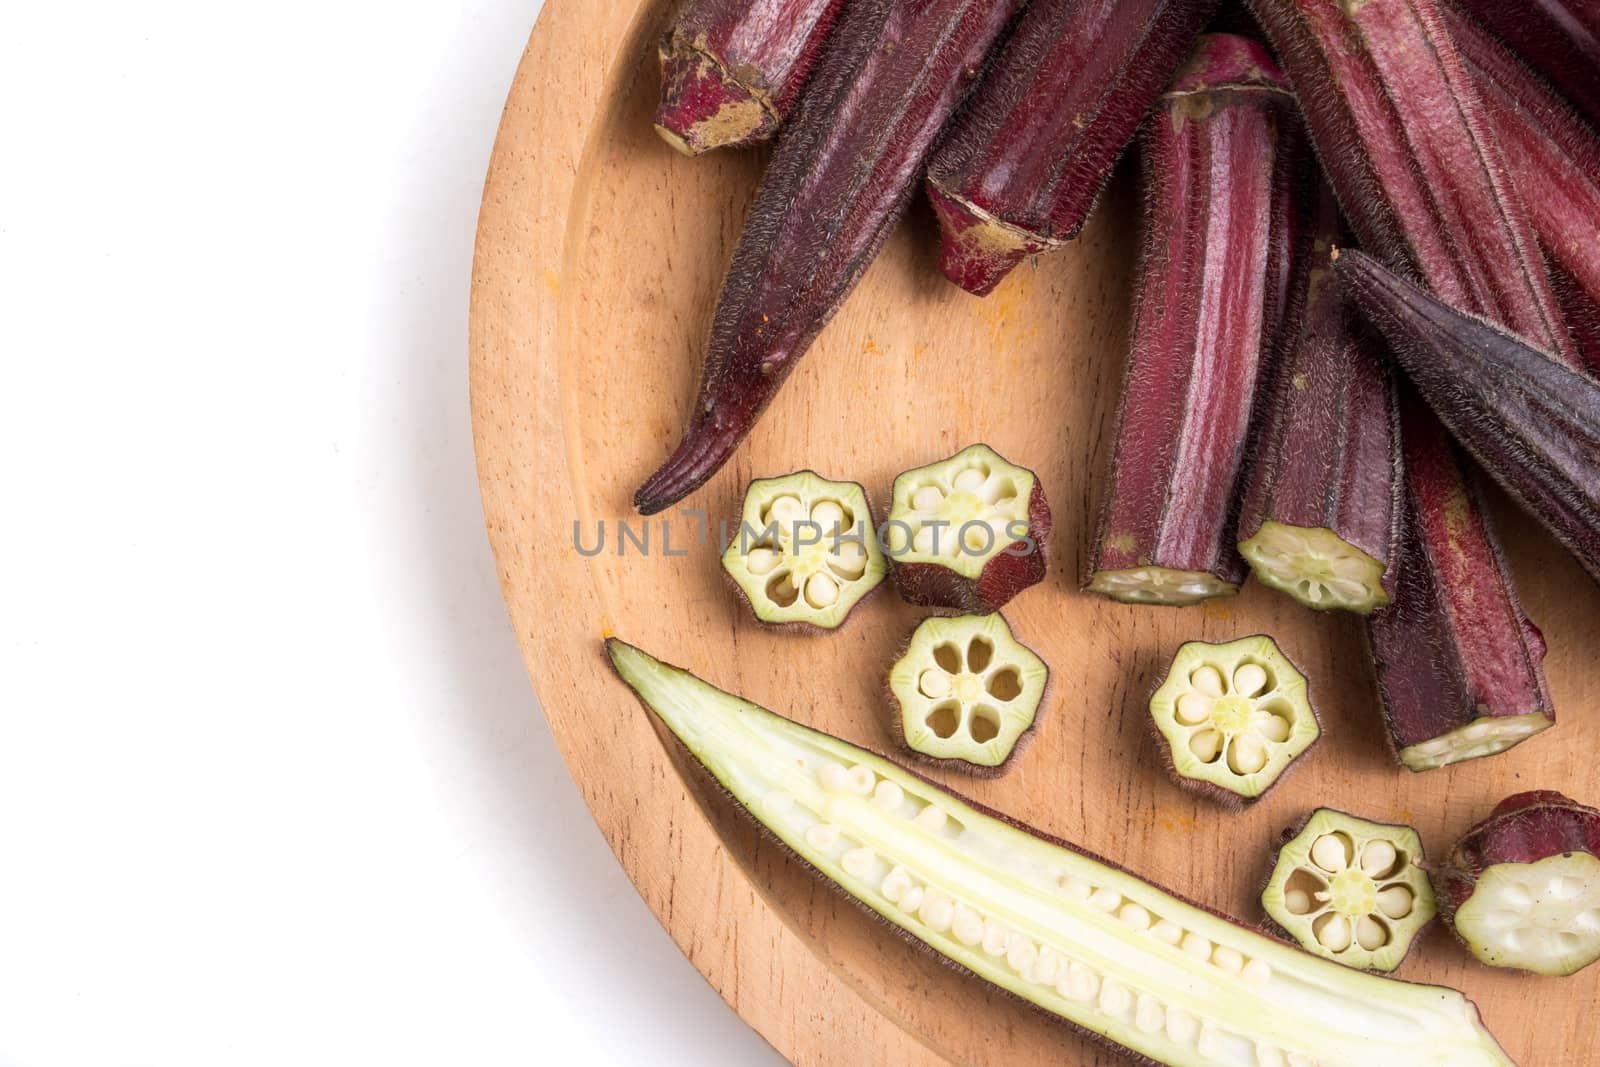 Fresh Red okra on tray over white background.